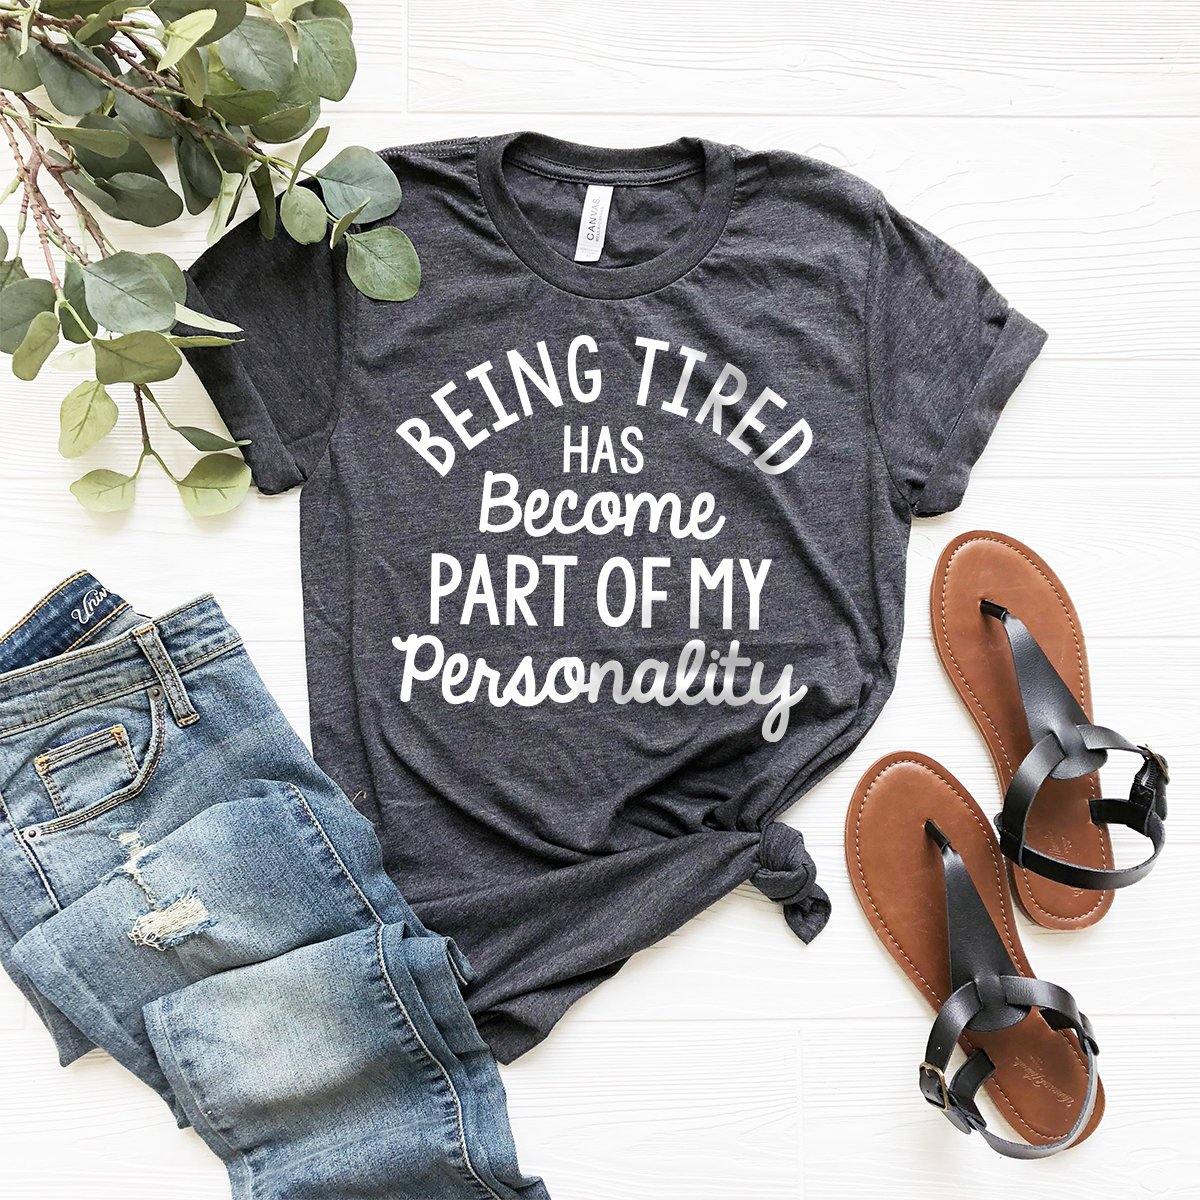 being tired has become part of my personality shirt, funny shirt